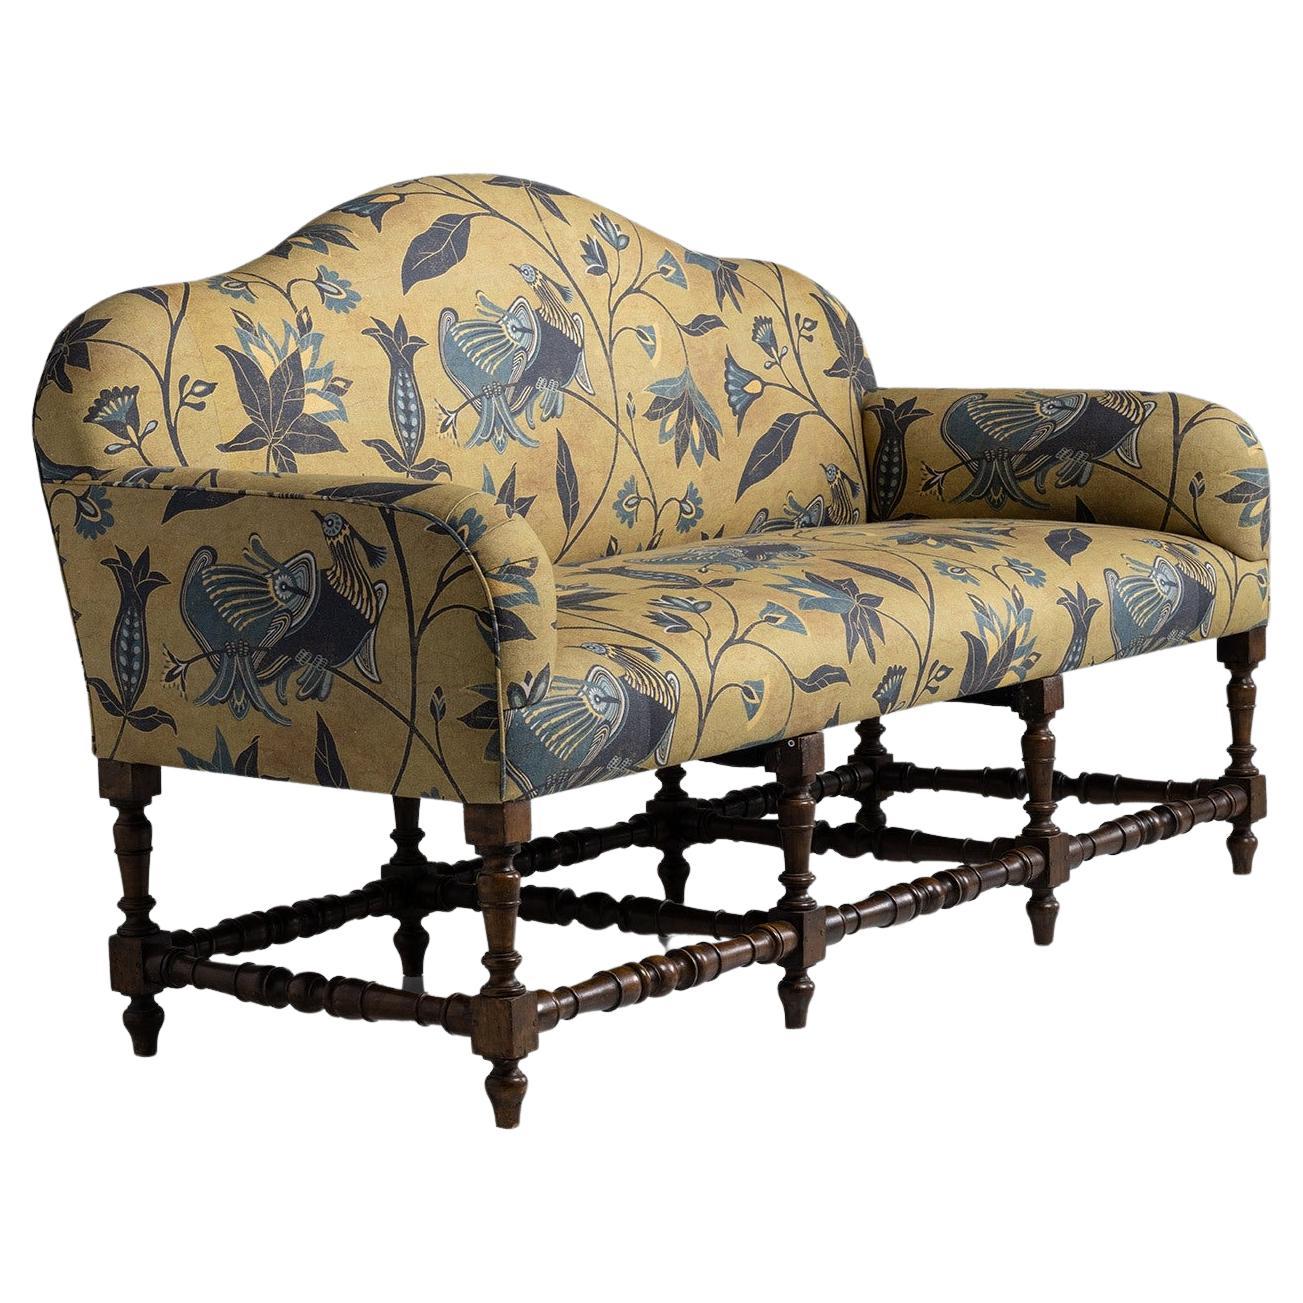 Camelback Sofa in Linen Floral Print by James Malone, Italy, Circa 1860